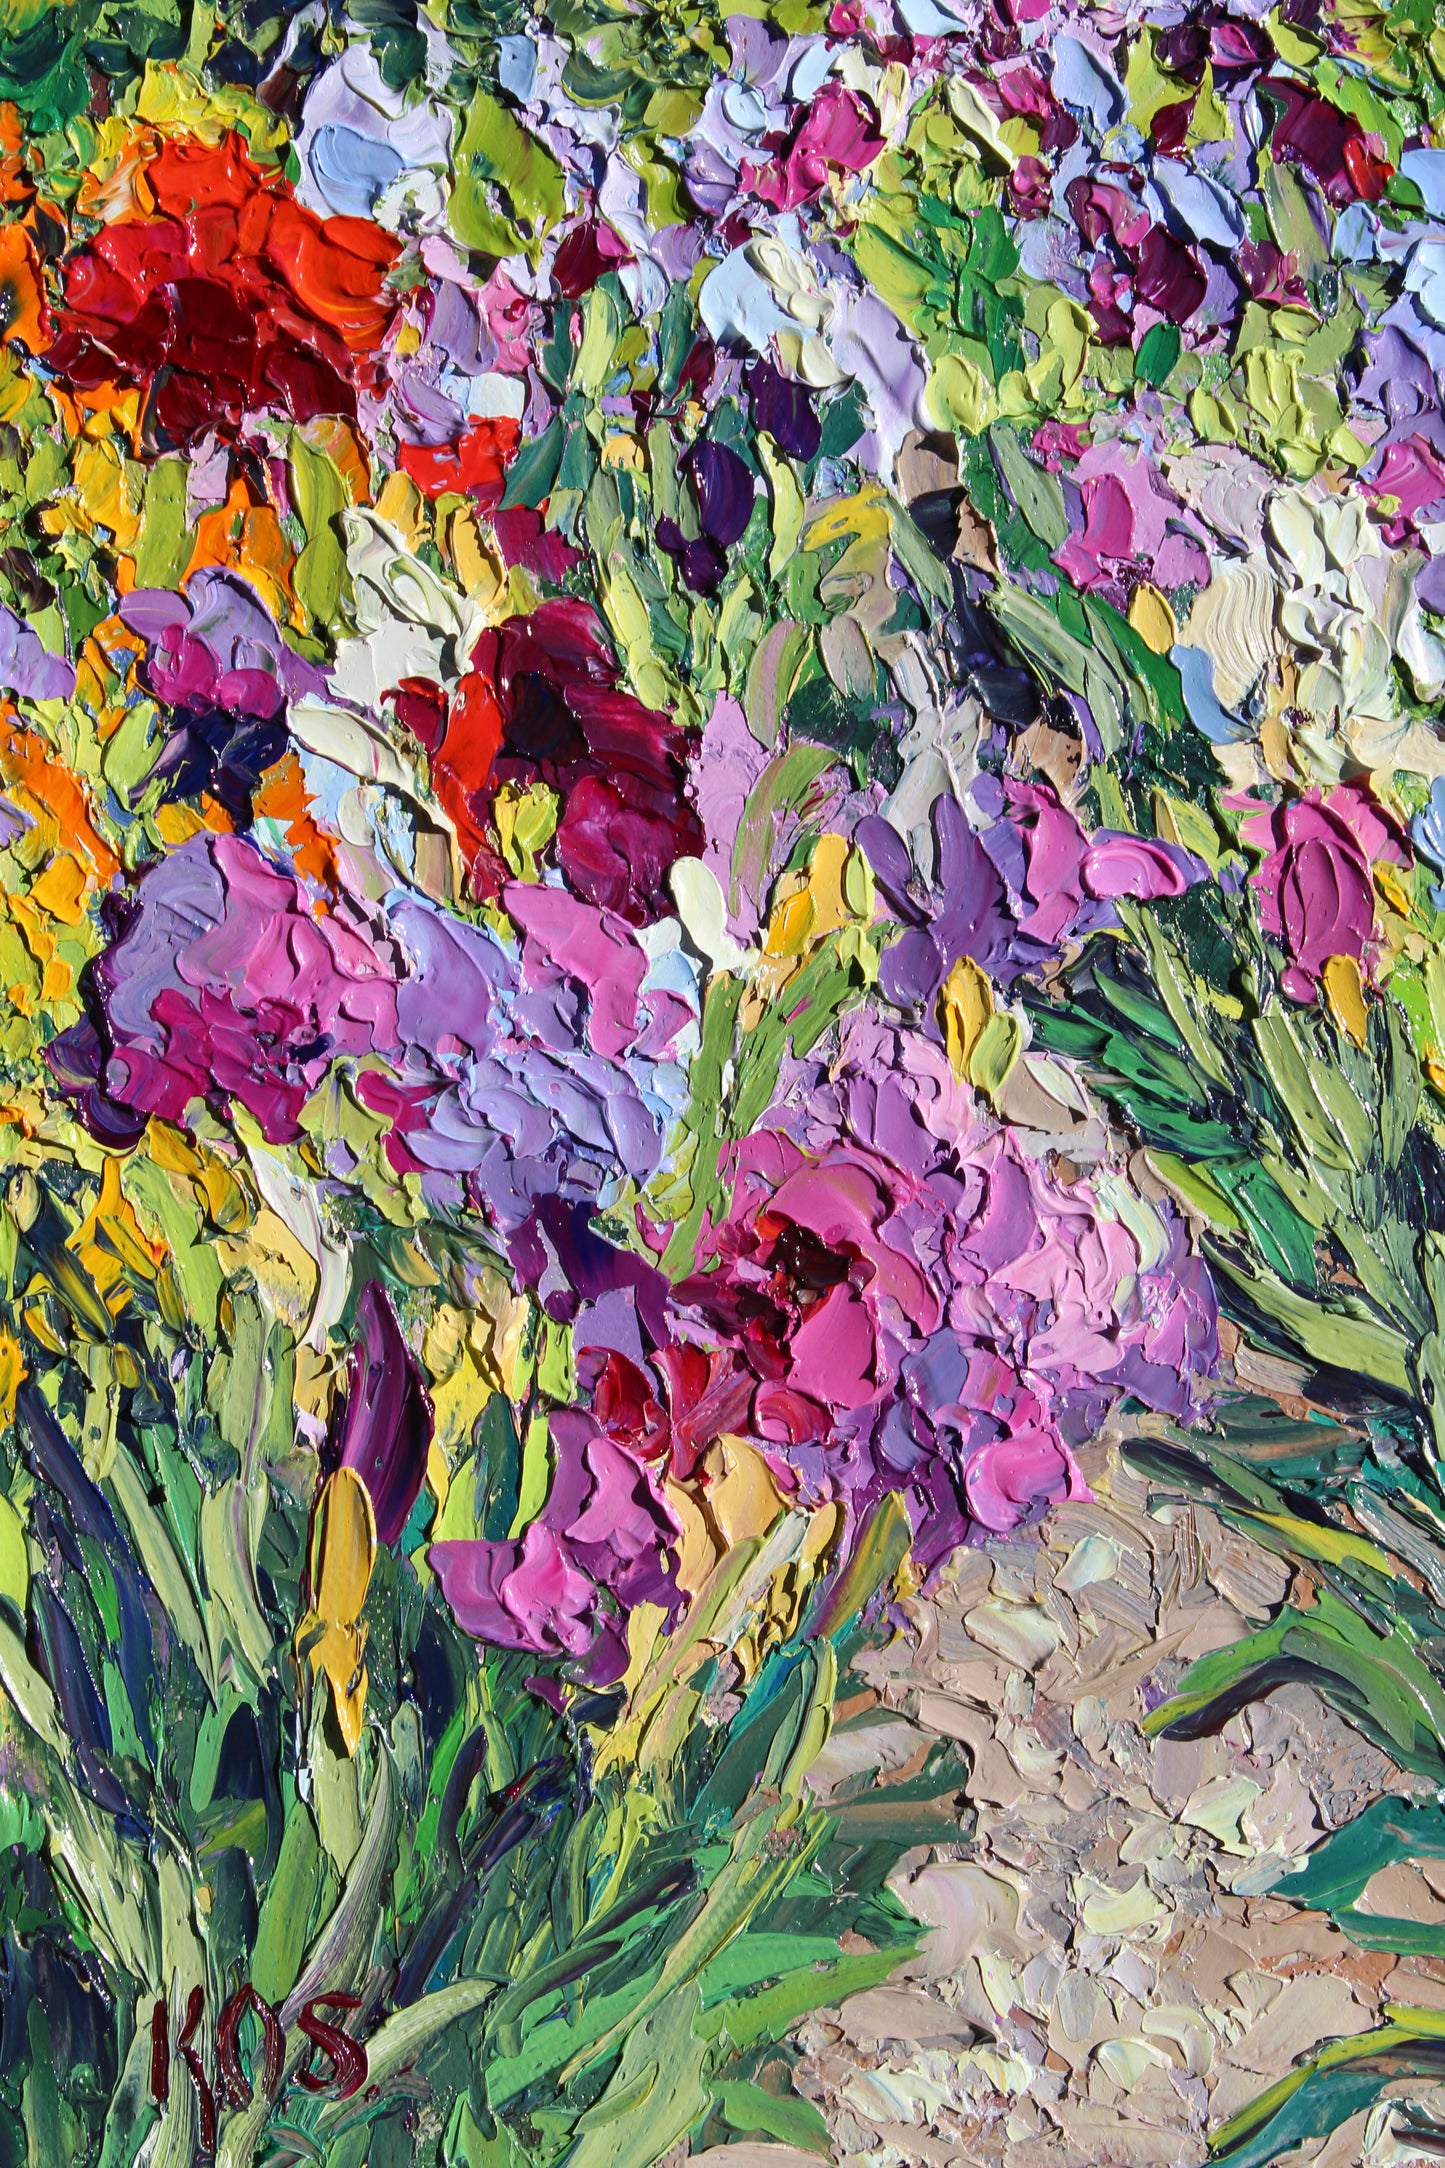 Monet's Flower Garden, An Original 14" x 11" Oil Painting On Canvas Of Colorful Impasto Flowers At Giverny